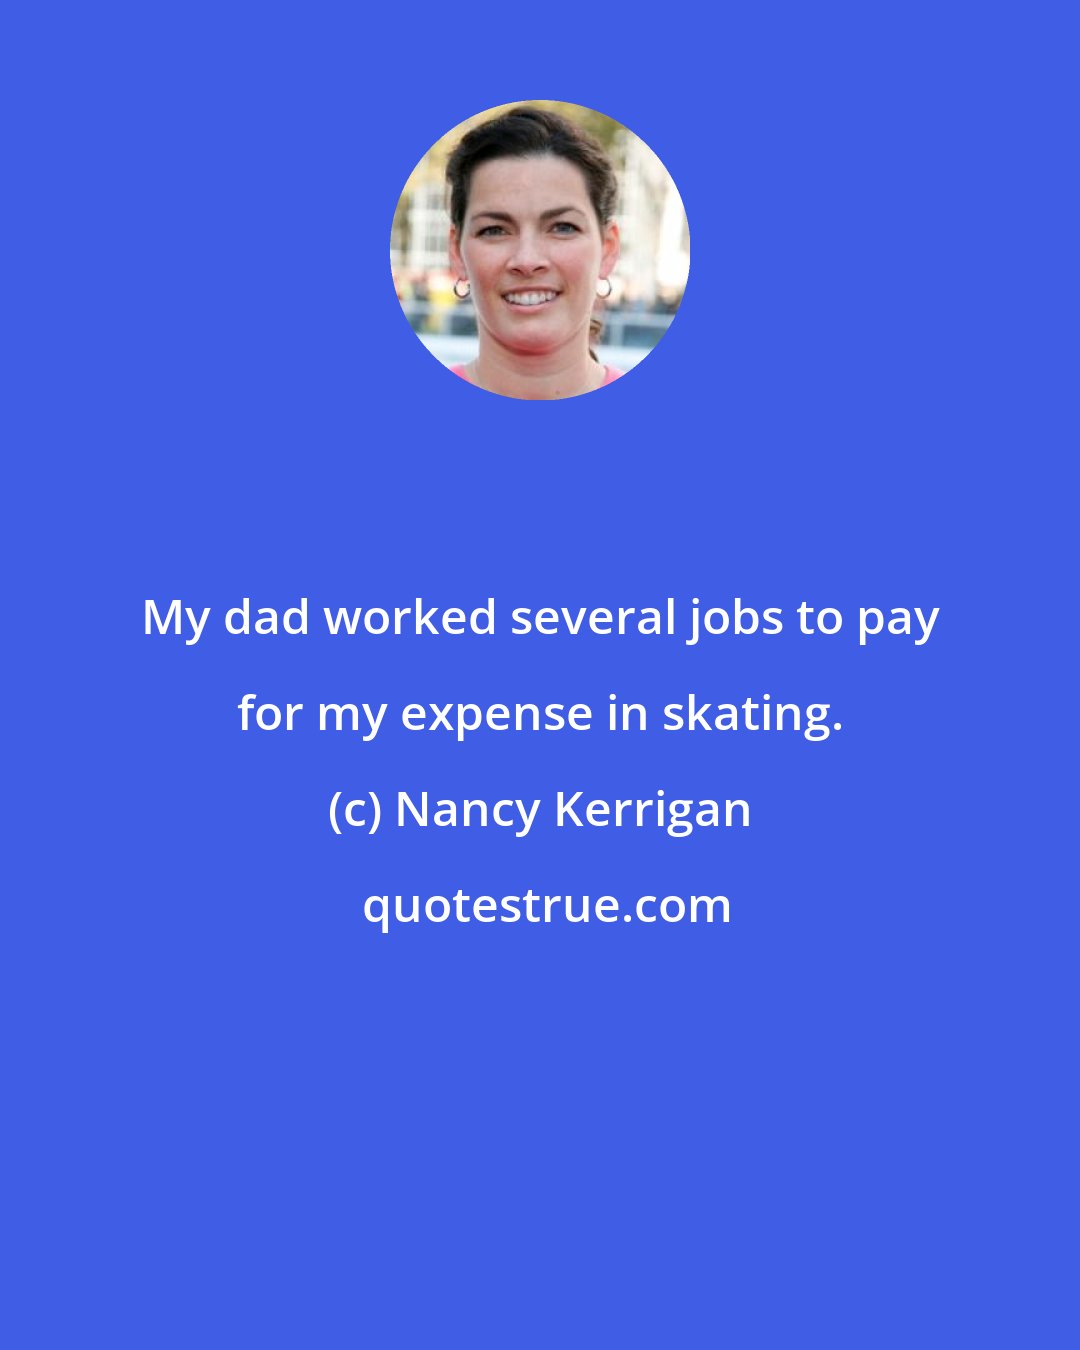 Nancy Kerrigan: My dad worked several jobs to pay for my expense in skating.